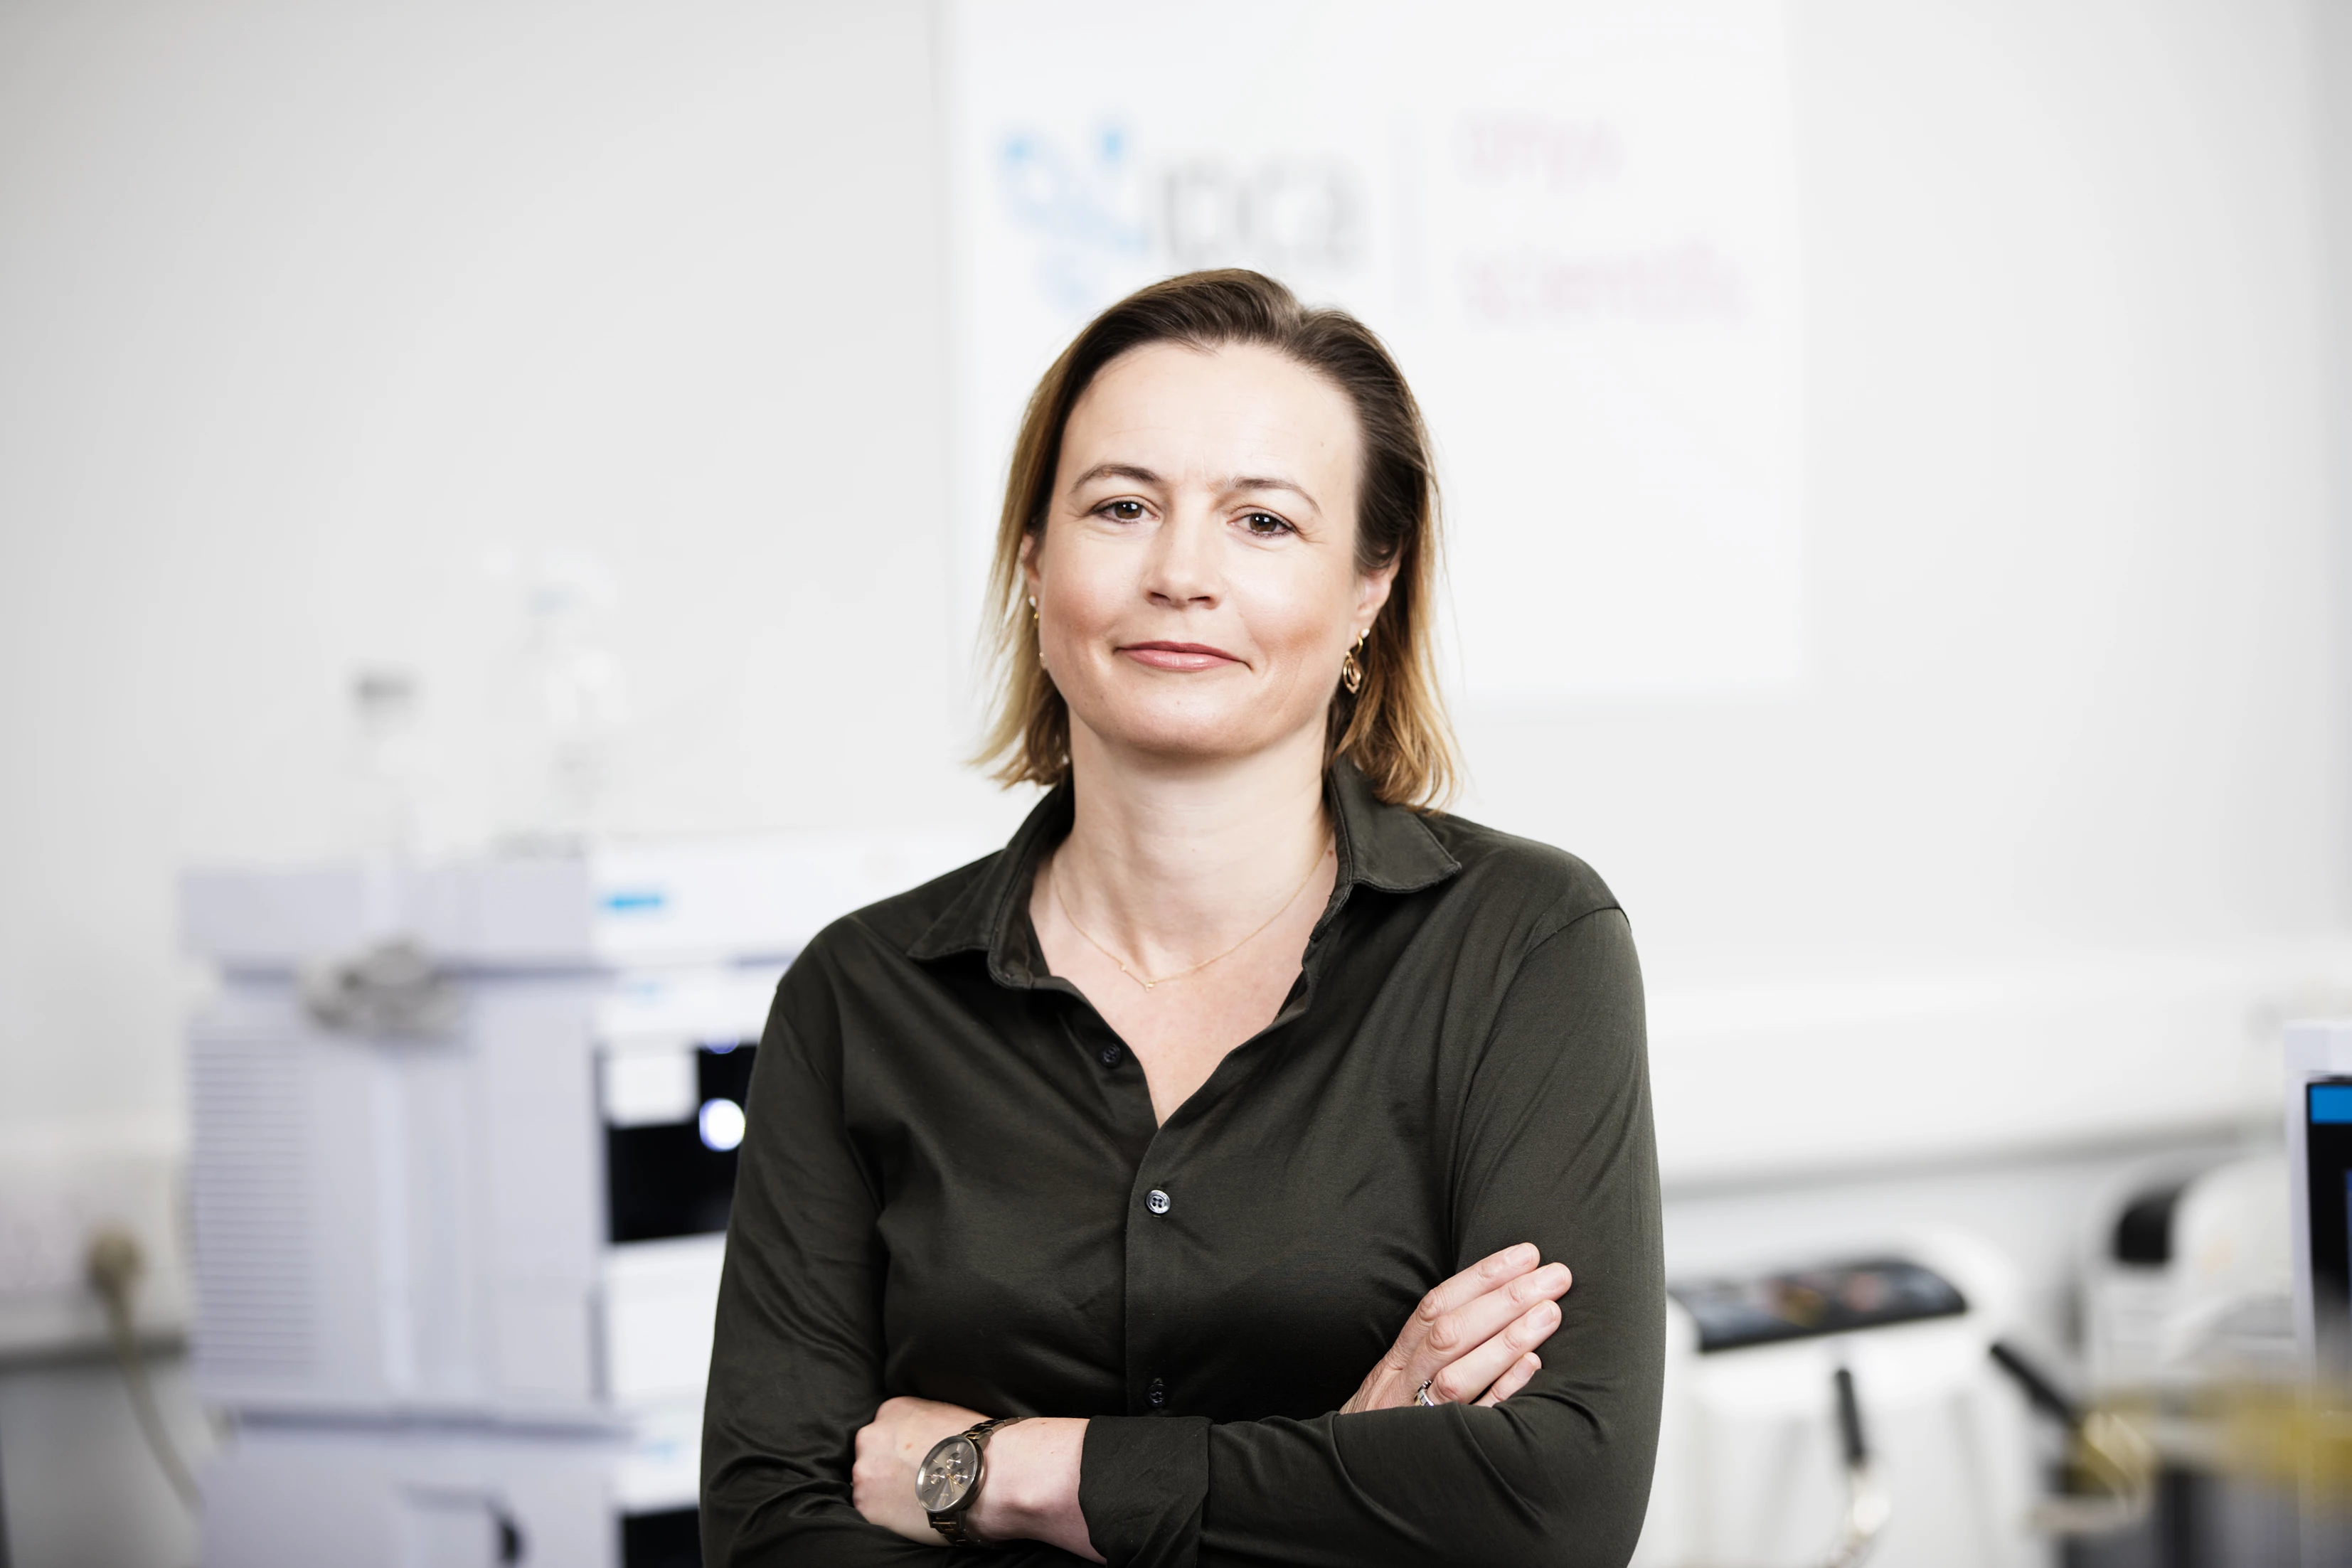 Denise Bowser, Commercial Director and a Founding Director of Onyx Scientific